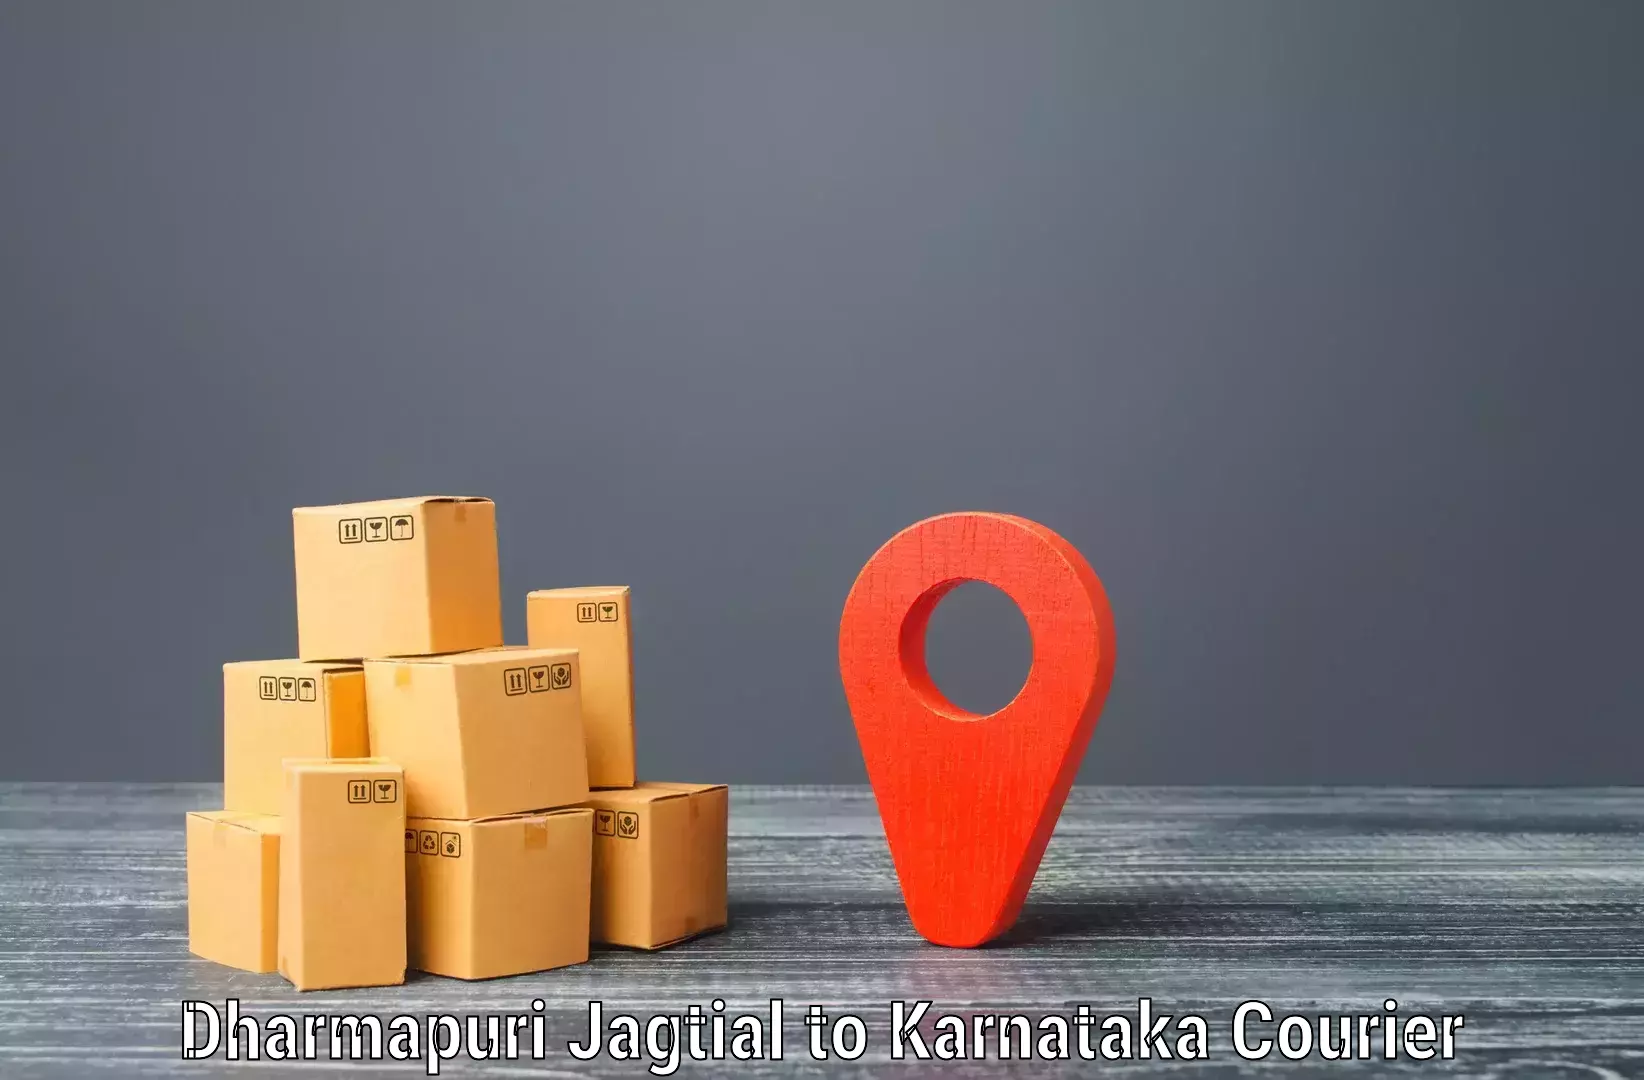 Same-day delivery solutions Dharmapuri Jagtial to Manipal Academy of Higher Education